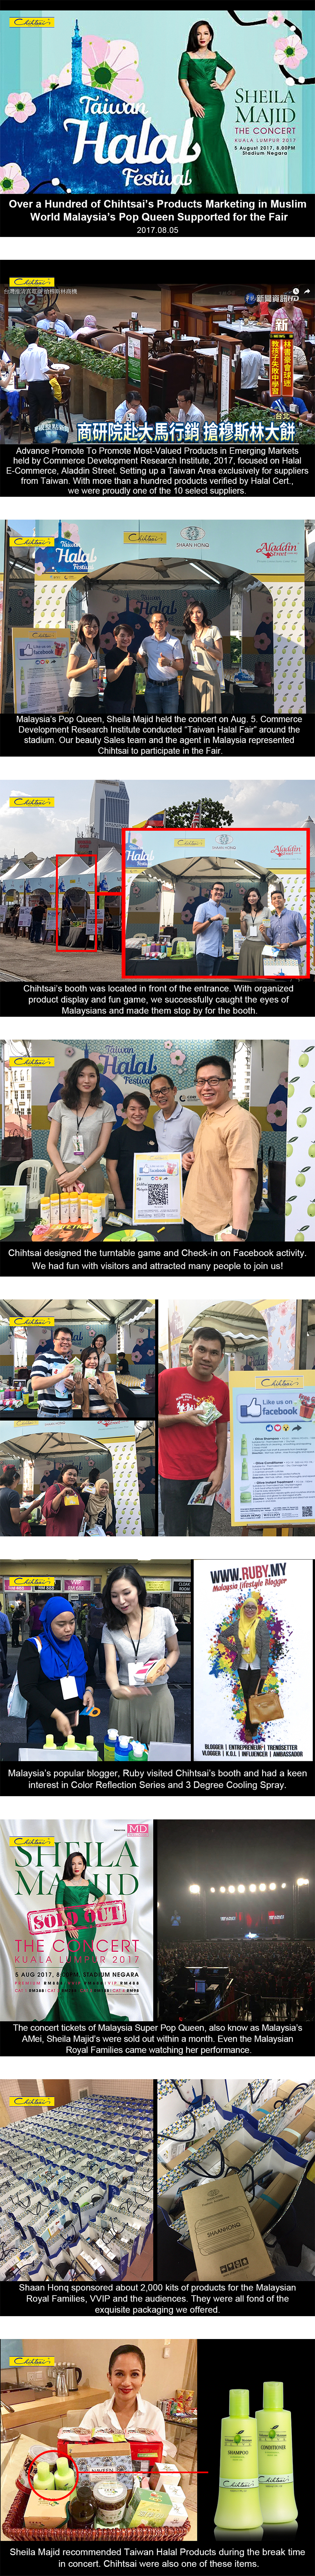 Over a Hundred of Chijtsai's Products Marking in World Malaysia's Pop Queen Supported for the Fair